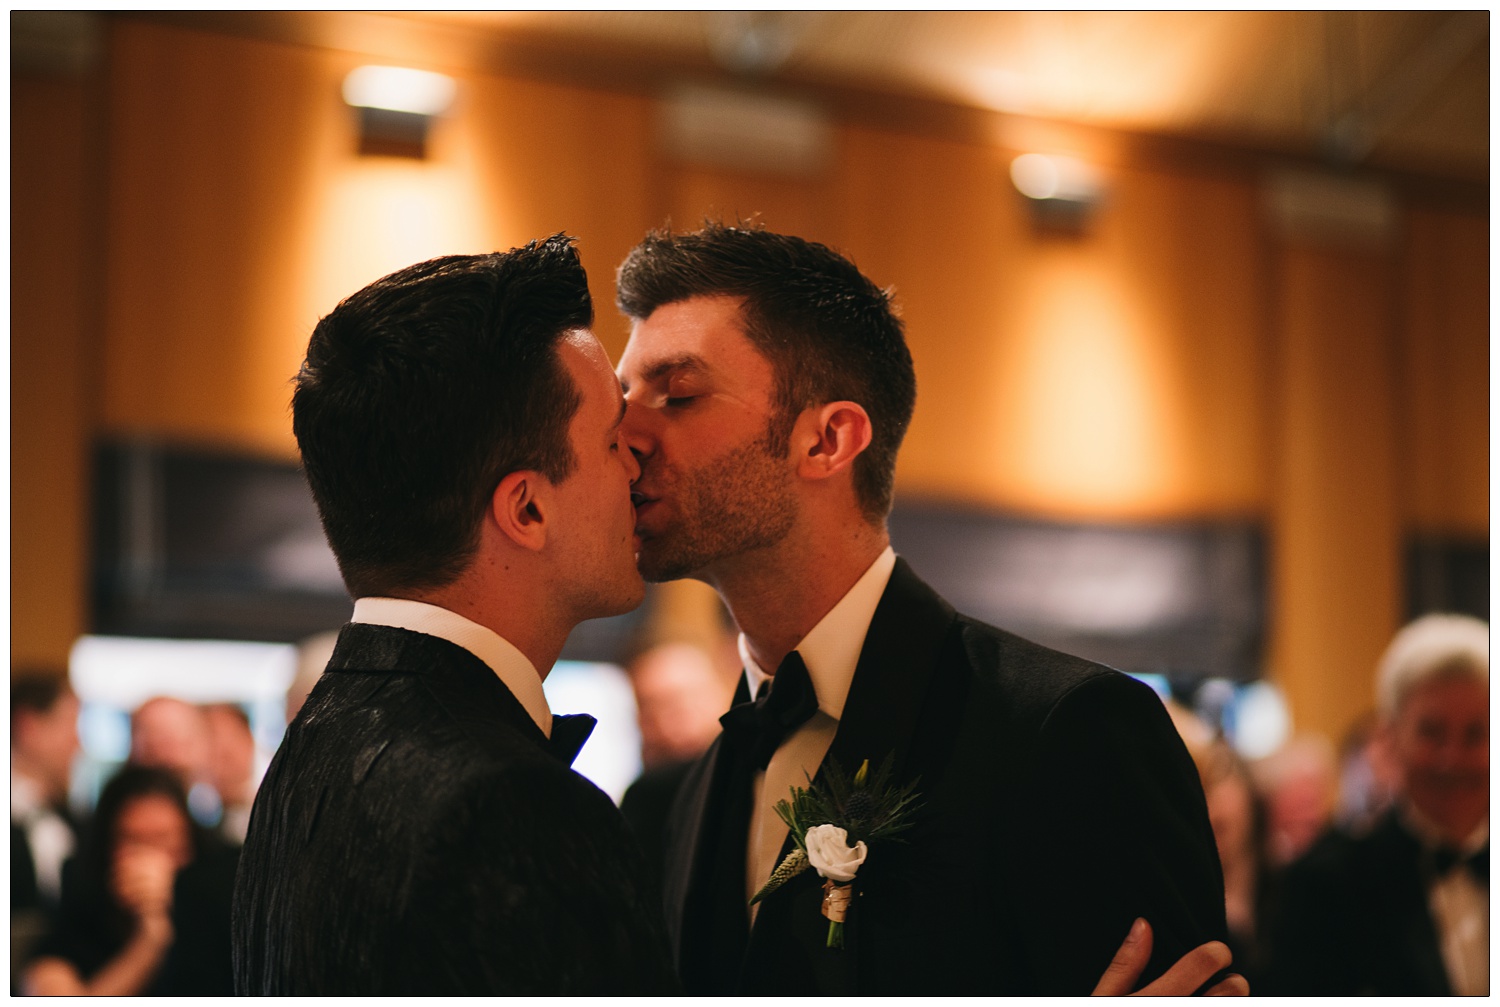 Two men kiss during a civil partnership ceremony.